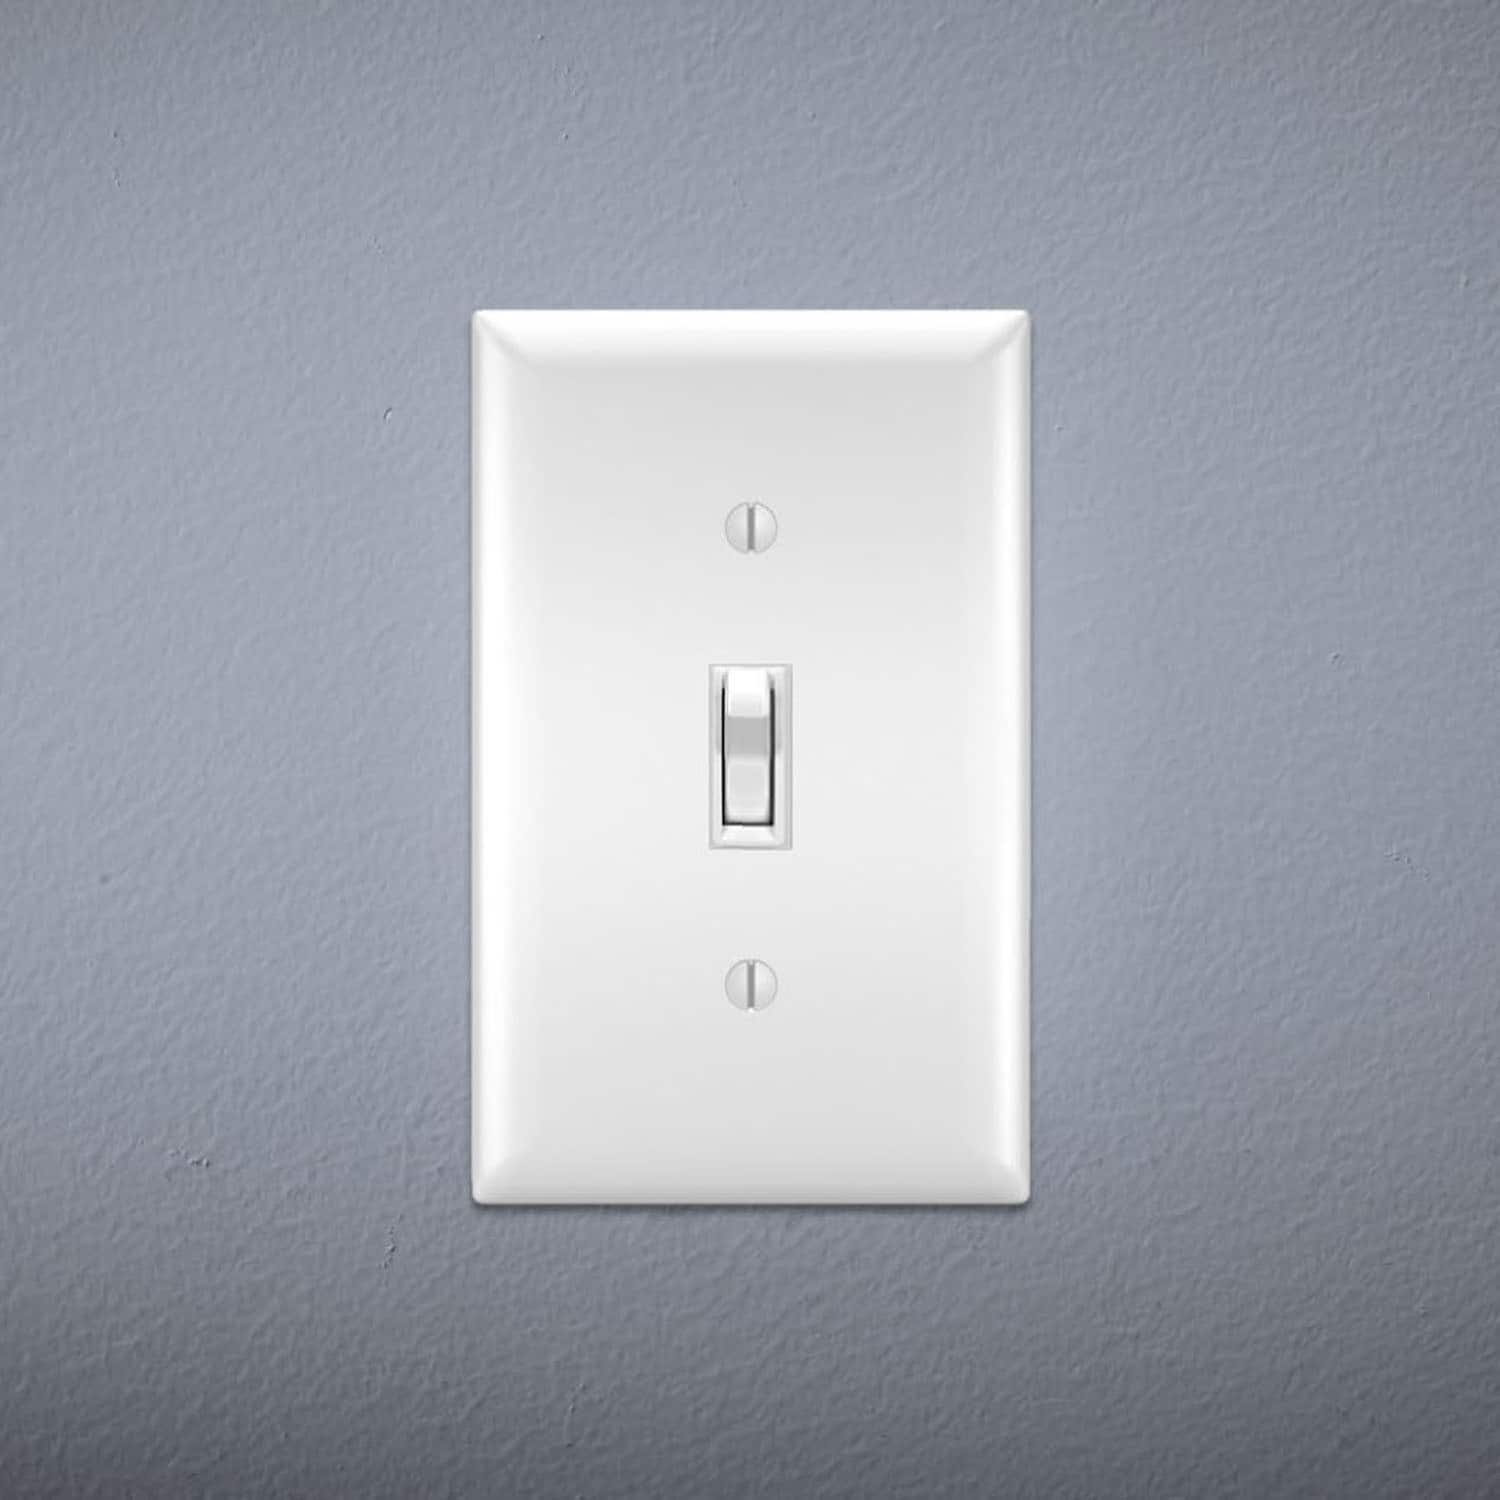 Legrand 15-Amp 3-Way Framed Toggle Light Switch, White in the